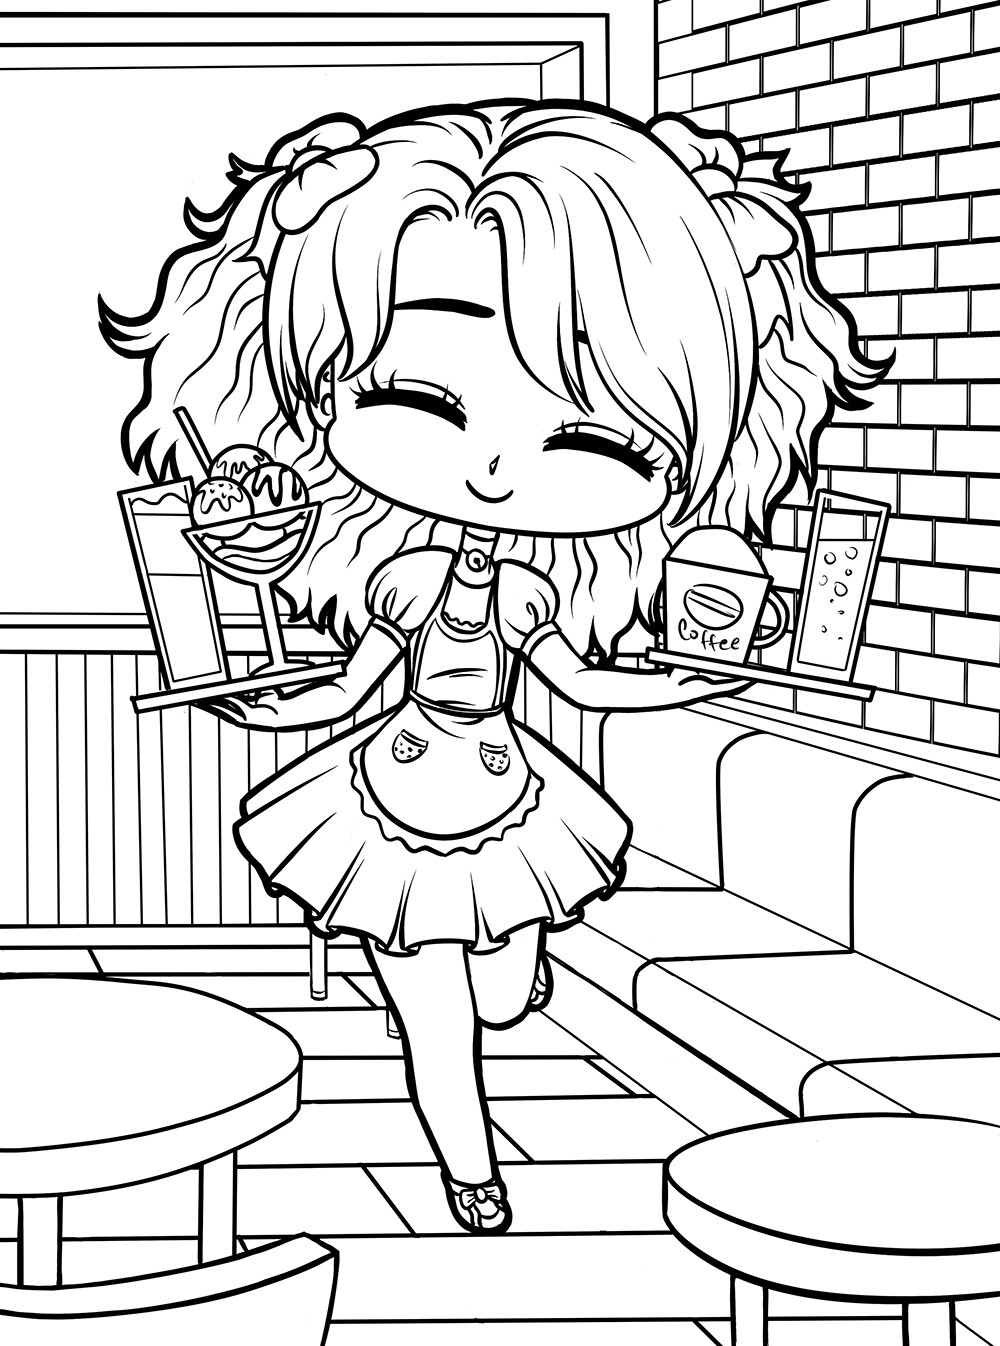 ArtStation - Chibi coloring pages